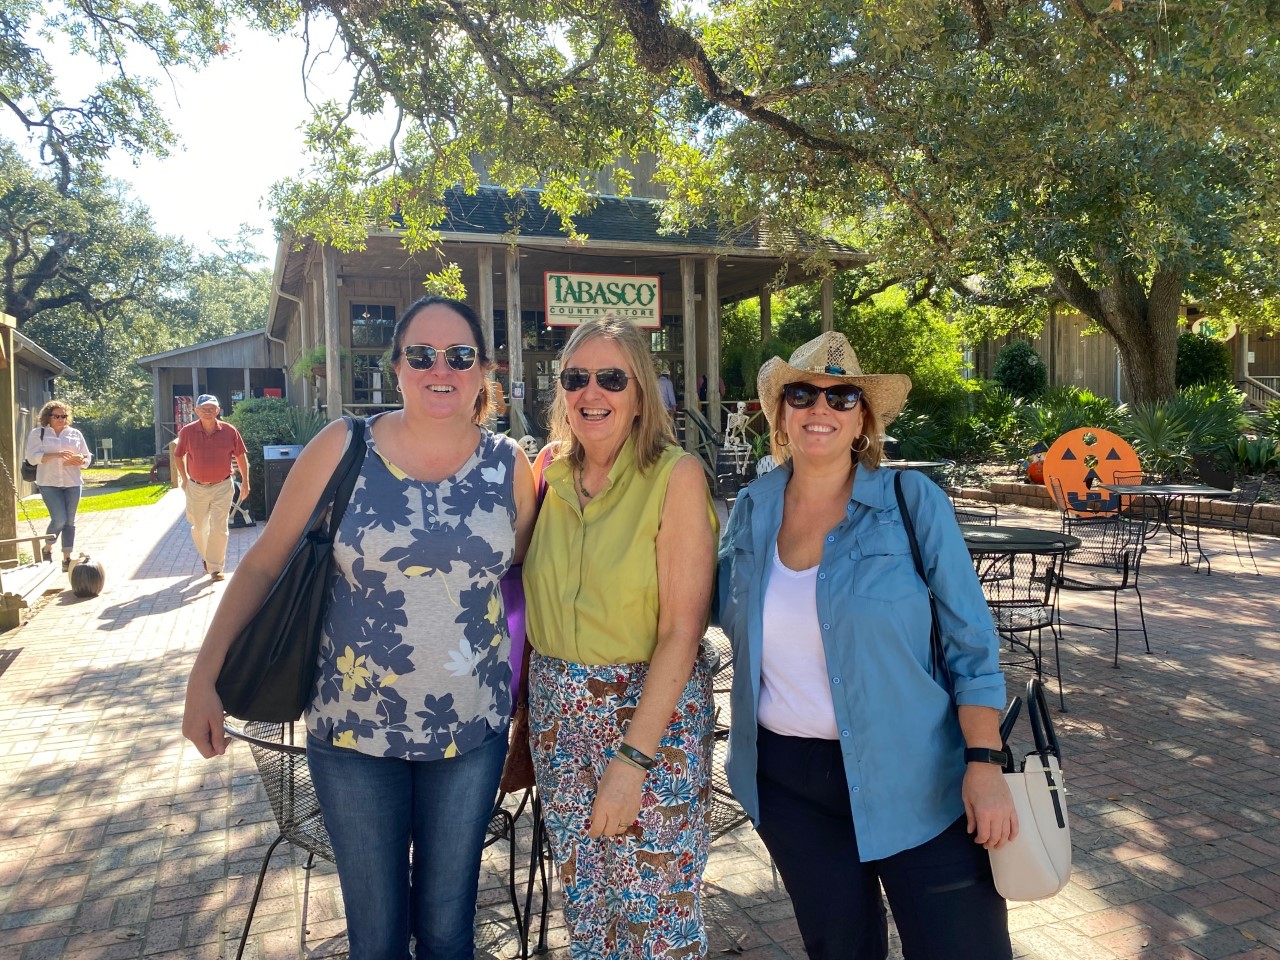 A visit to the Avery Island Salt Mines brings together researchers from the Salt Congress